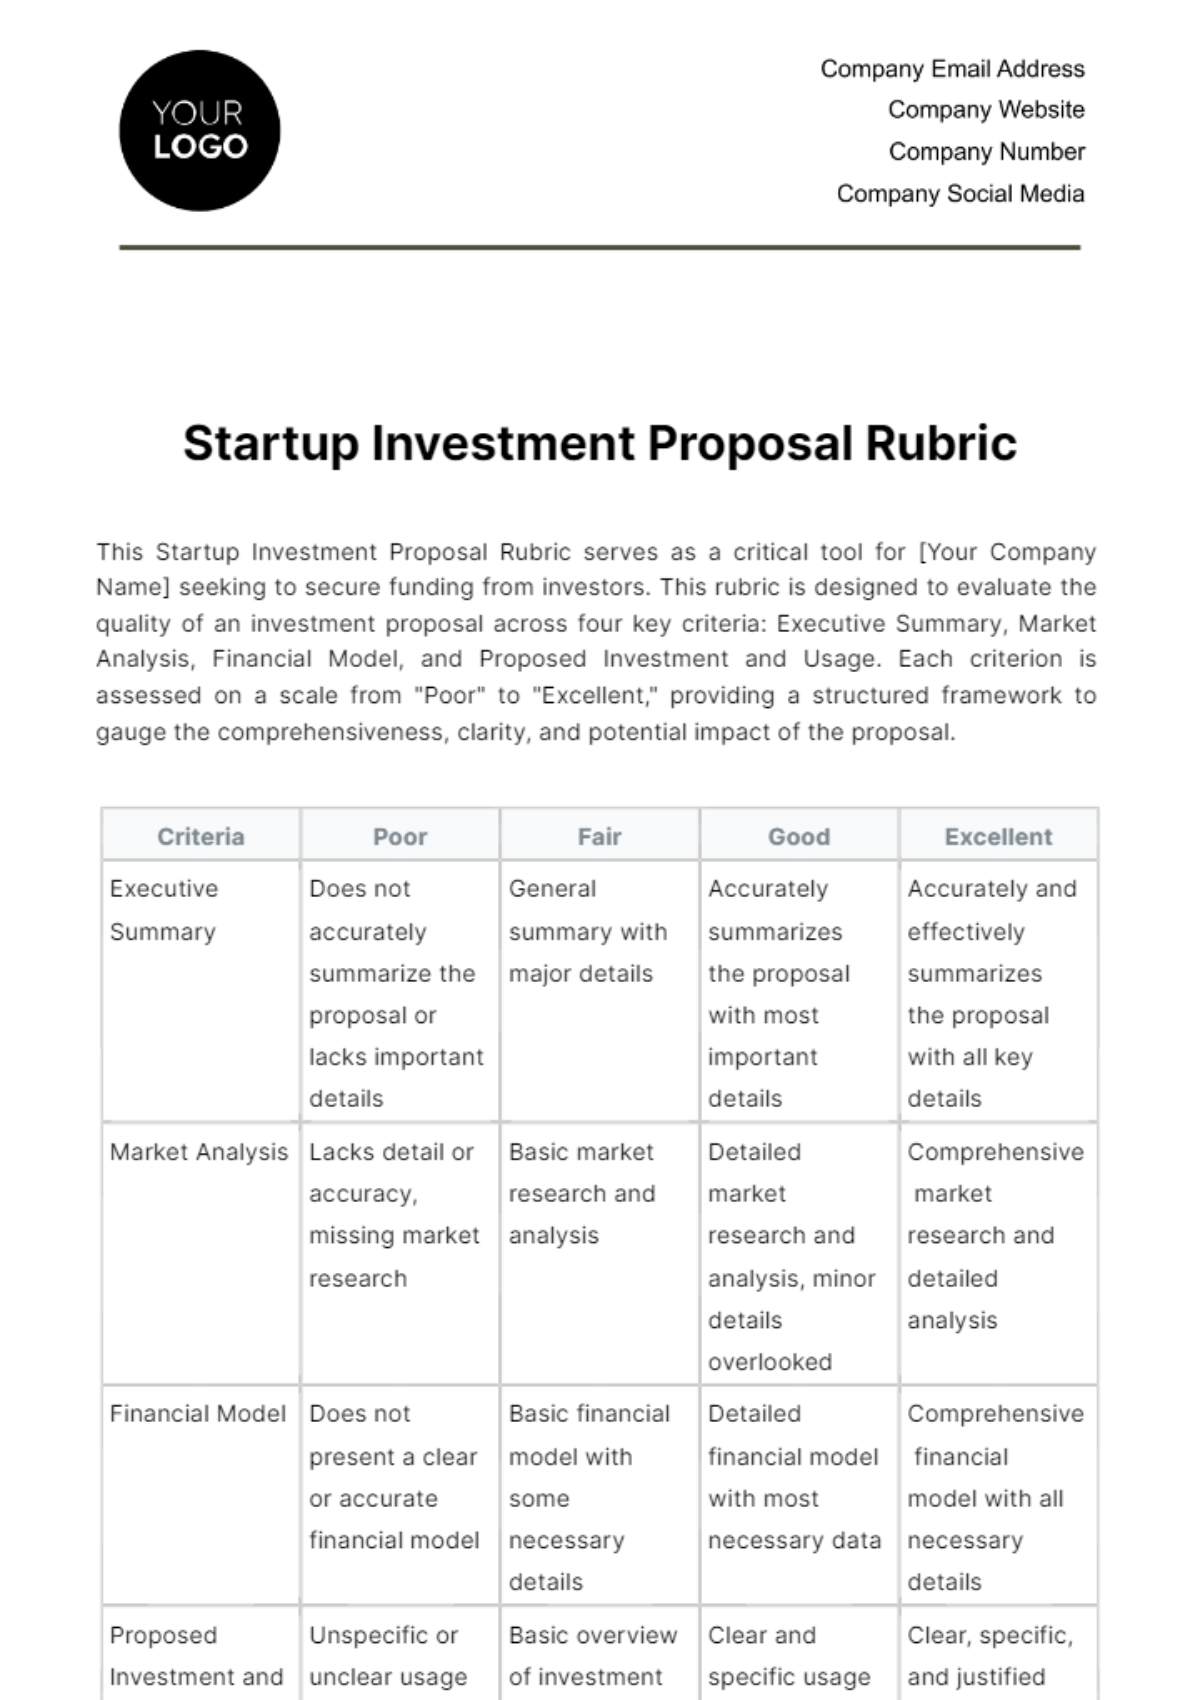 Startup Investment Proposal Rubric Template